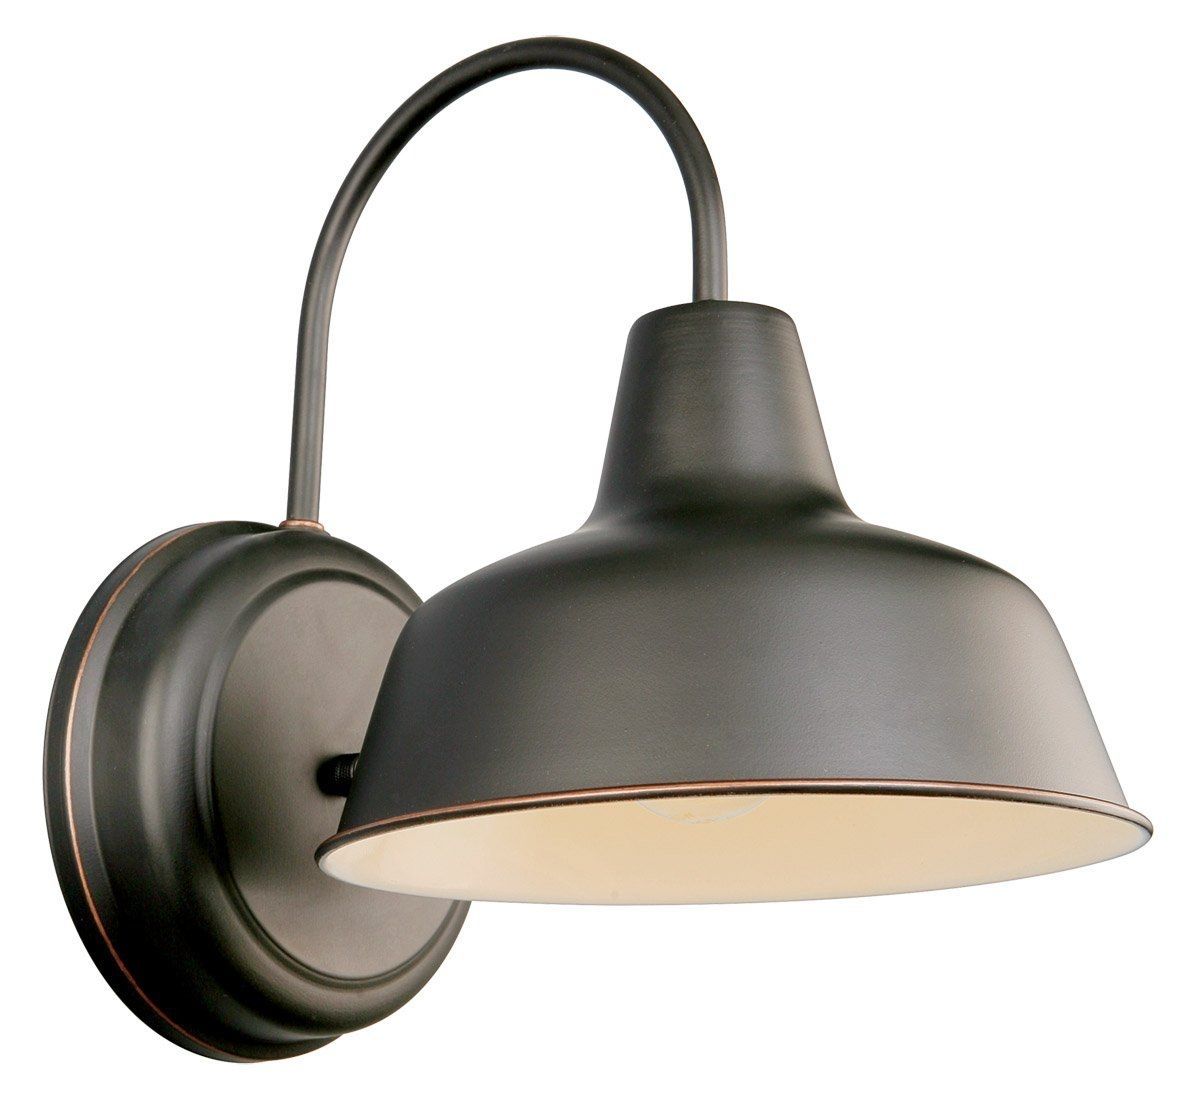 For Outsidegarage Amazon: Design House 519504 Mason Intended For Outdoor Wall Lighting At Wayfair (Photo 15 of 15)